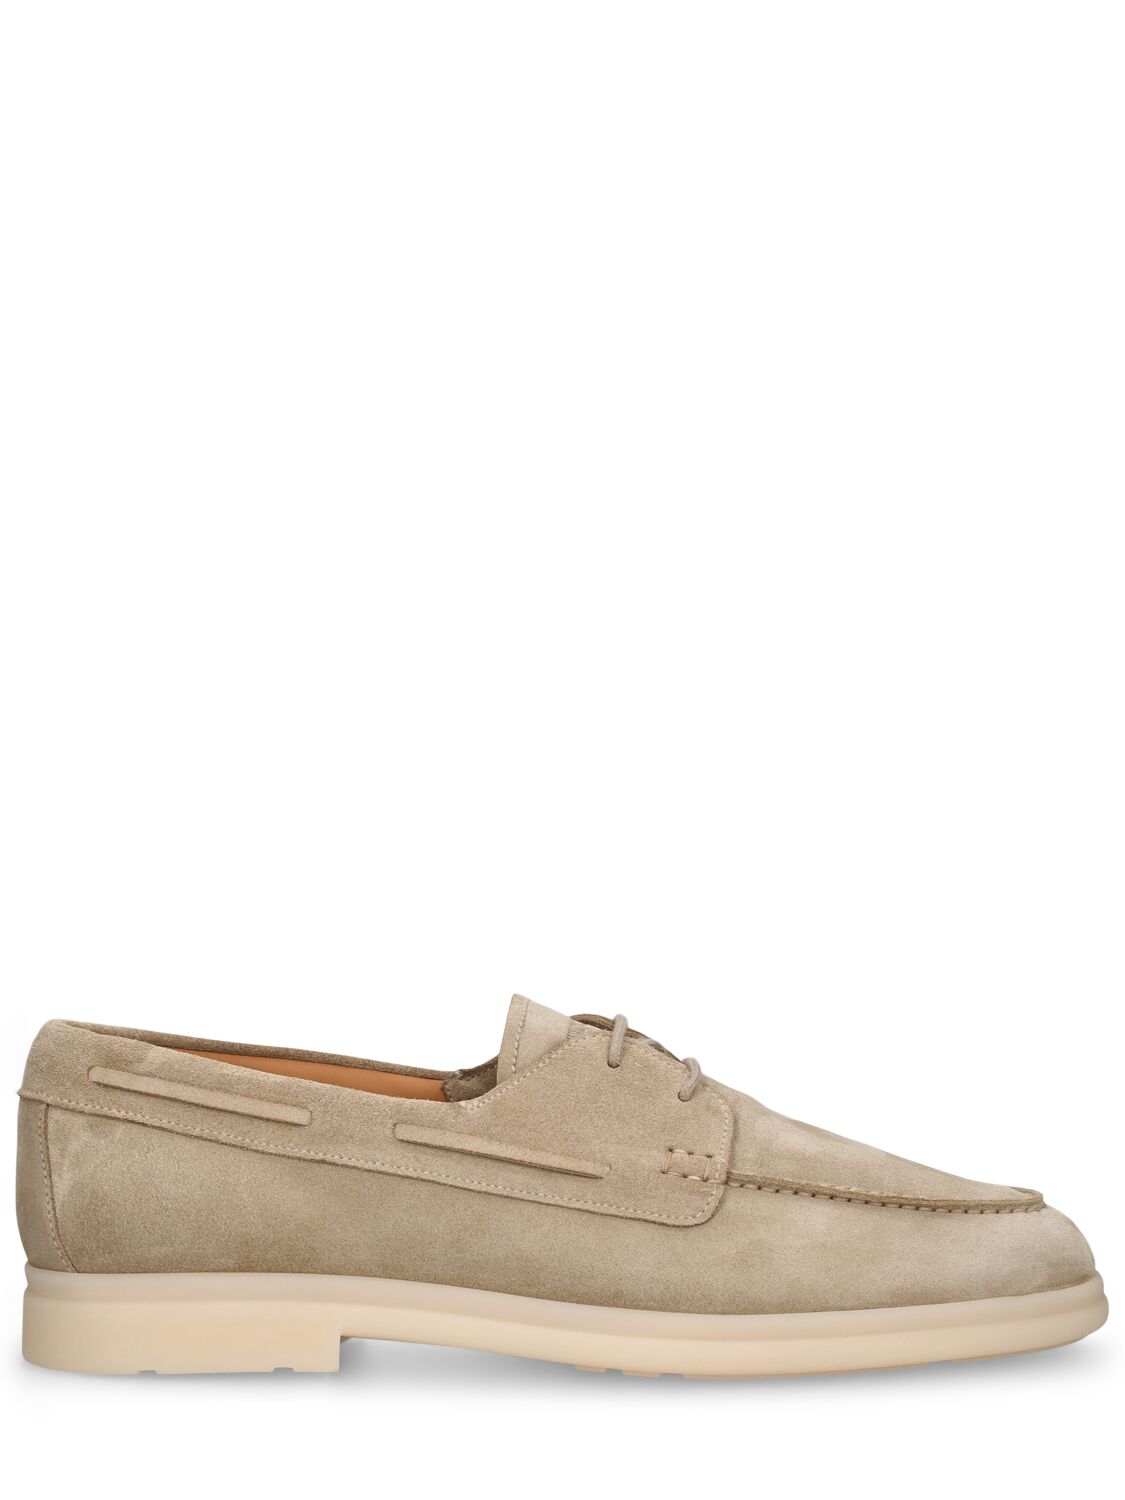 Church's Morley Suede Lace-up Boat Shoes In Desert